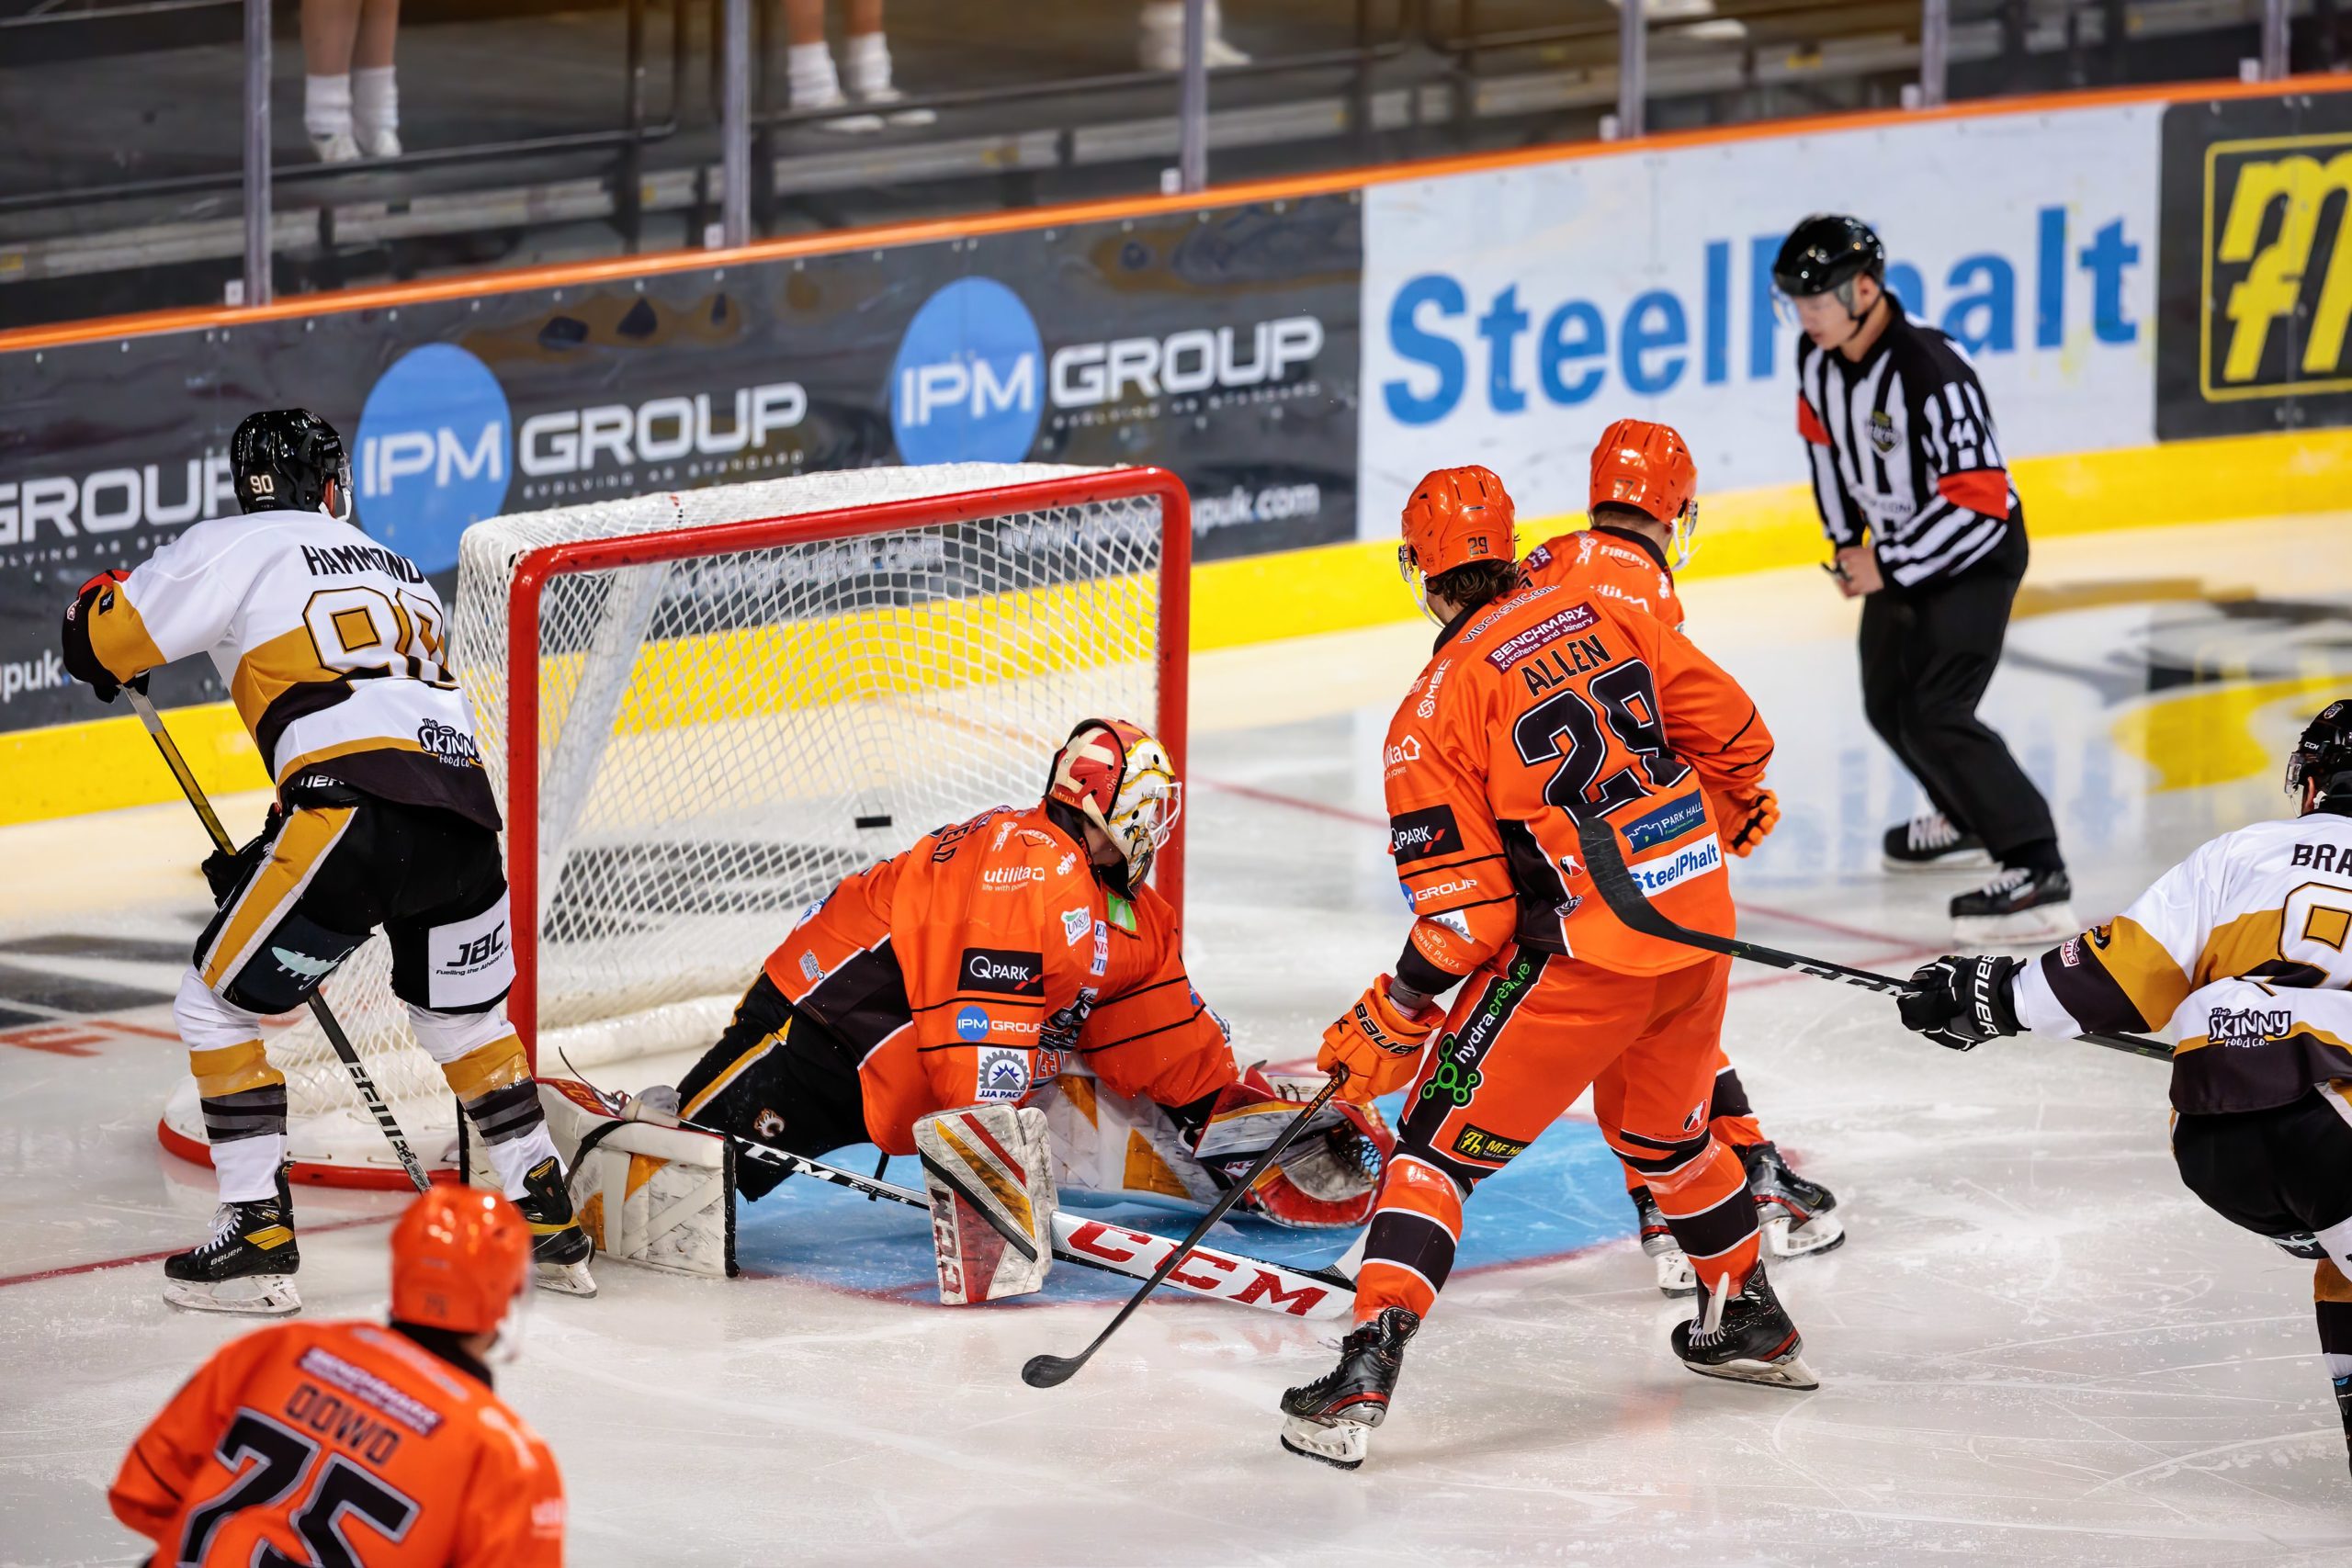 Adam Brady handed the Nottingham Panthers an early lead in an exhibition match last week (Image: Dean Woolley)